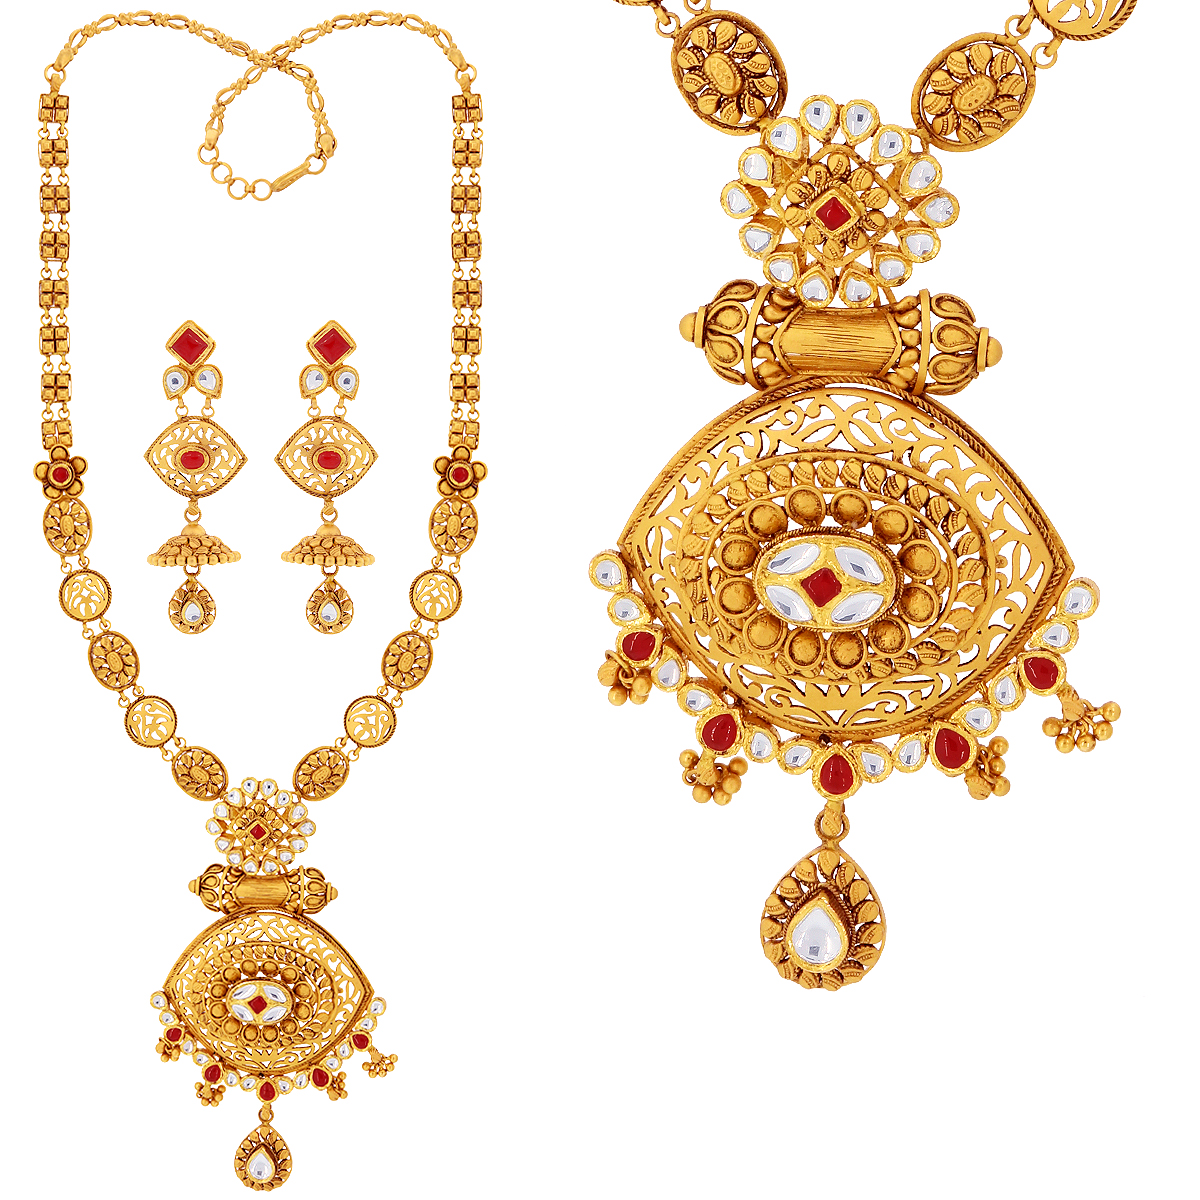 Anora Collection by Malani Jewelers: A Fusion of Tradition and Modernity |  by malani jewelers | Medium